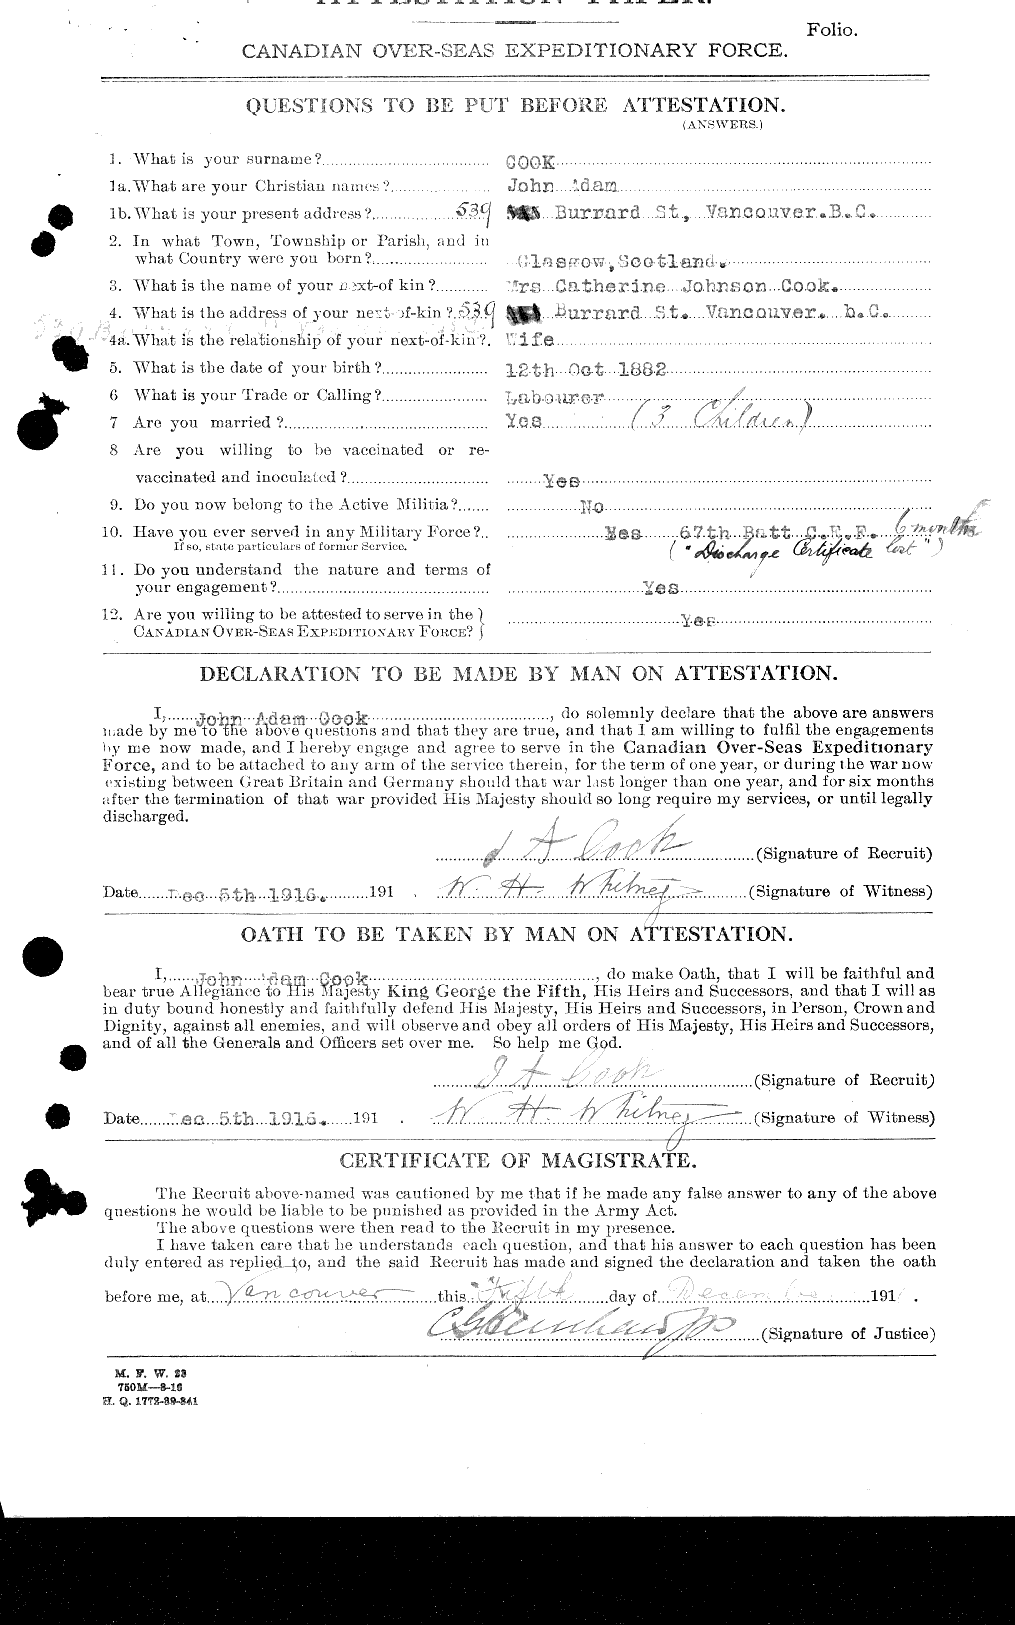 Personnel Records of the First World War - CEF 048898a